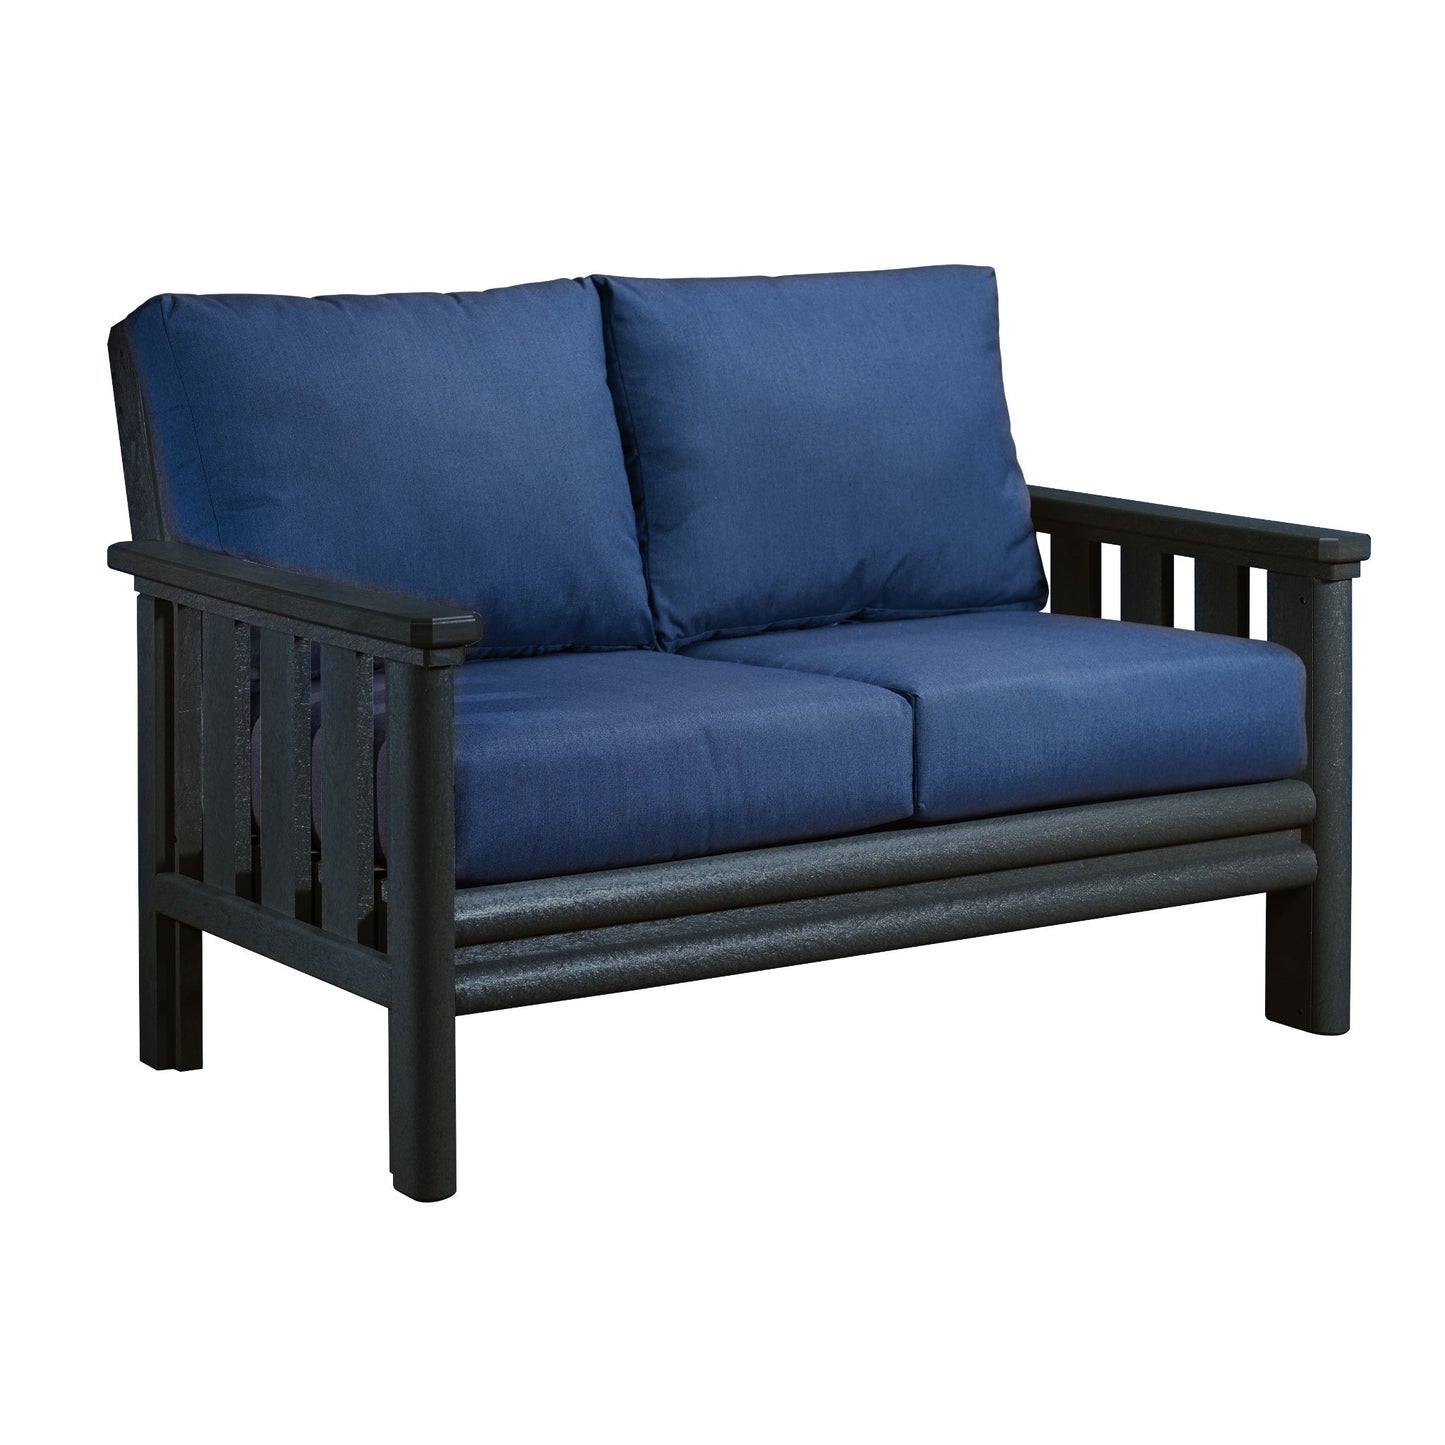 Stratford Loveseat BLACK FRAME WITH CUSHIONS - DSF262